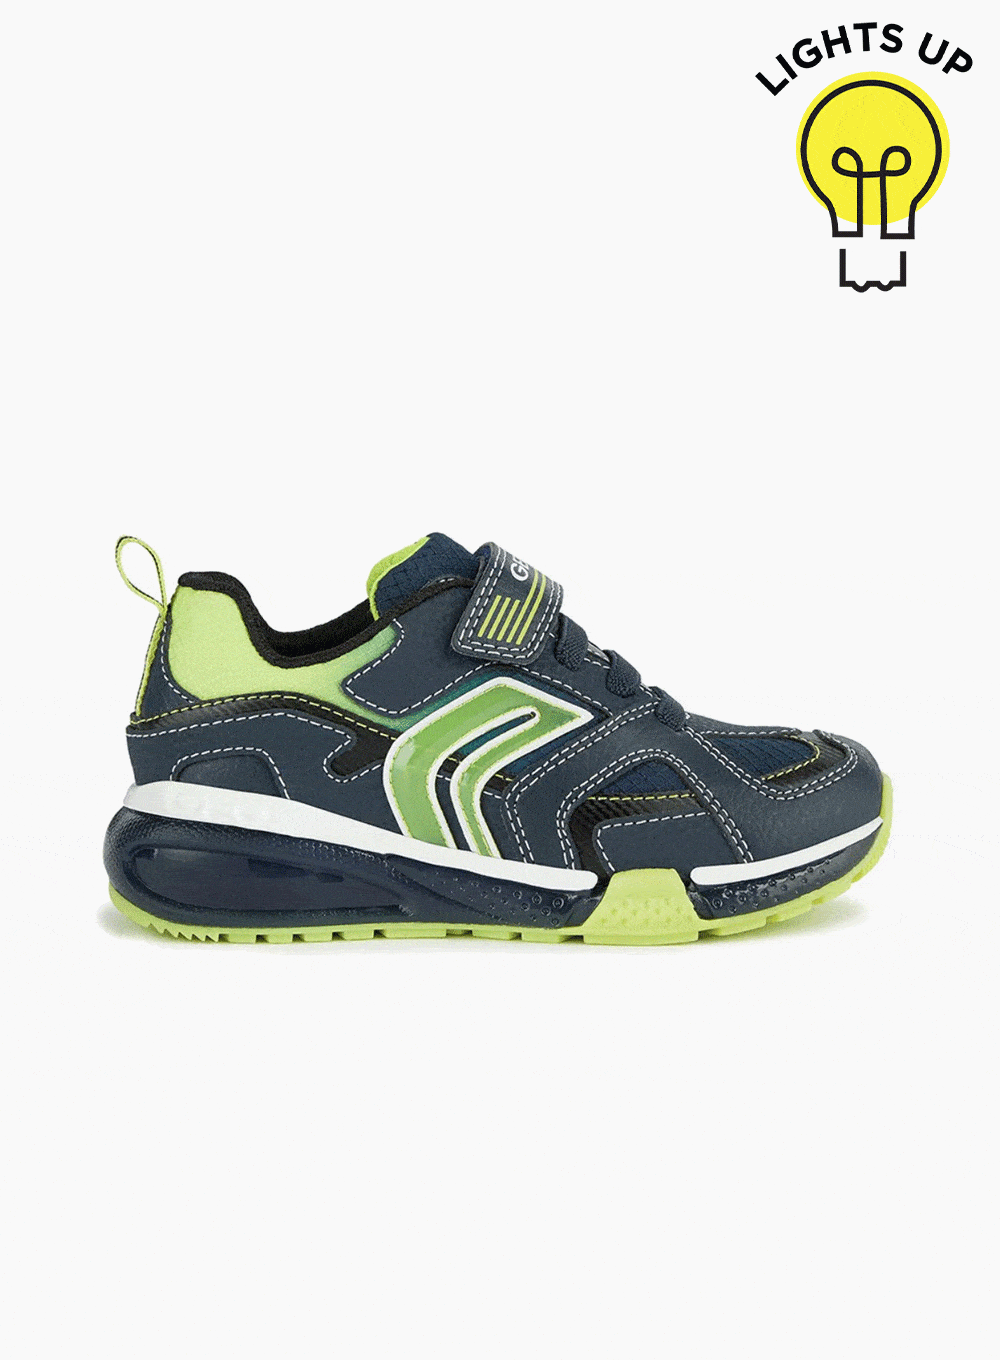 Susurro quemado Productivo Geox Bayonyc Light-Up Trainers in Navy/Lime | Trotters Childrenswear